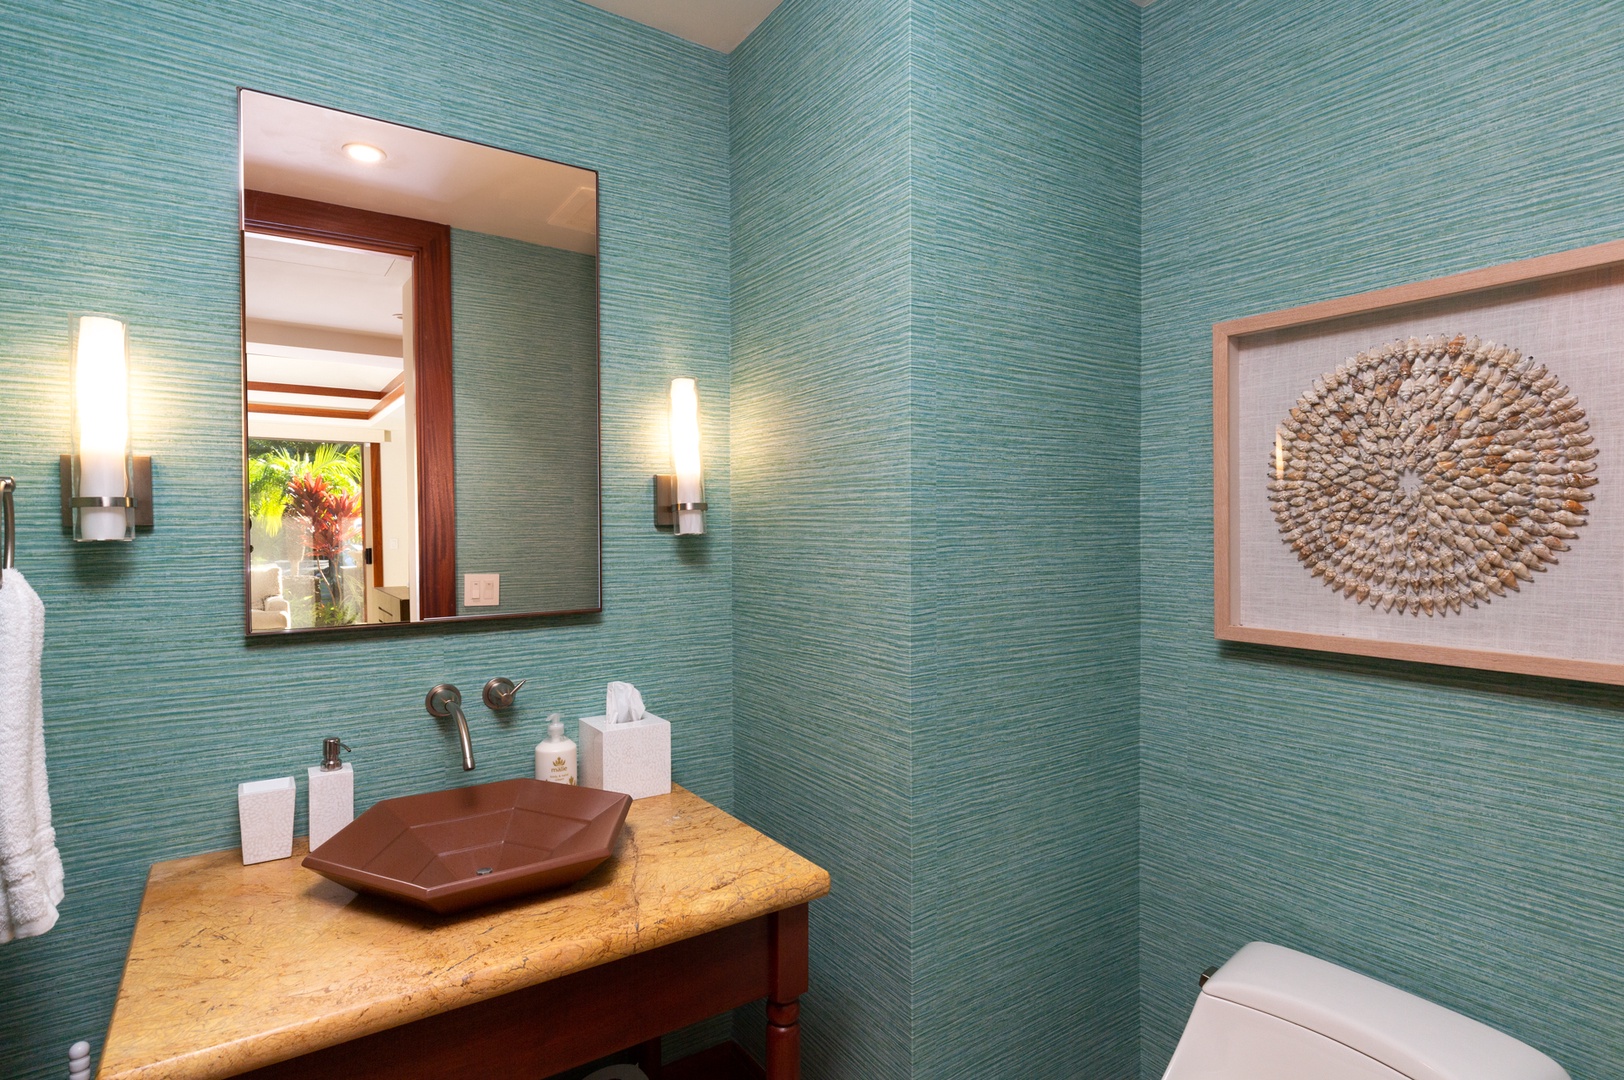 Kailua Kona Vacation Rentals, 4BD Hainoa Estate (102) at Four Seasons Resort at Hualalai - The powder room off of the great room is immersed in blue